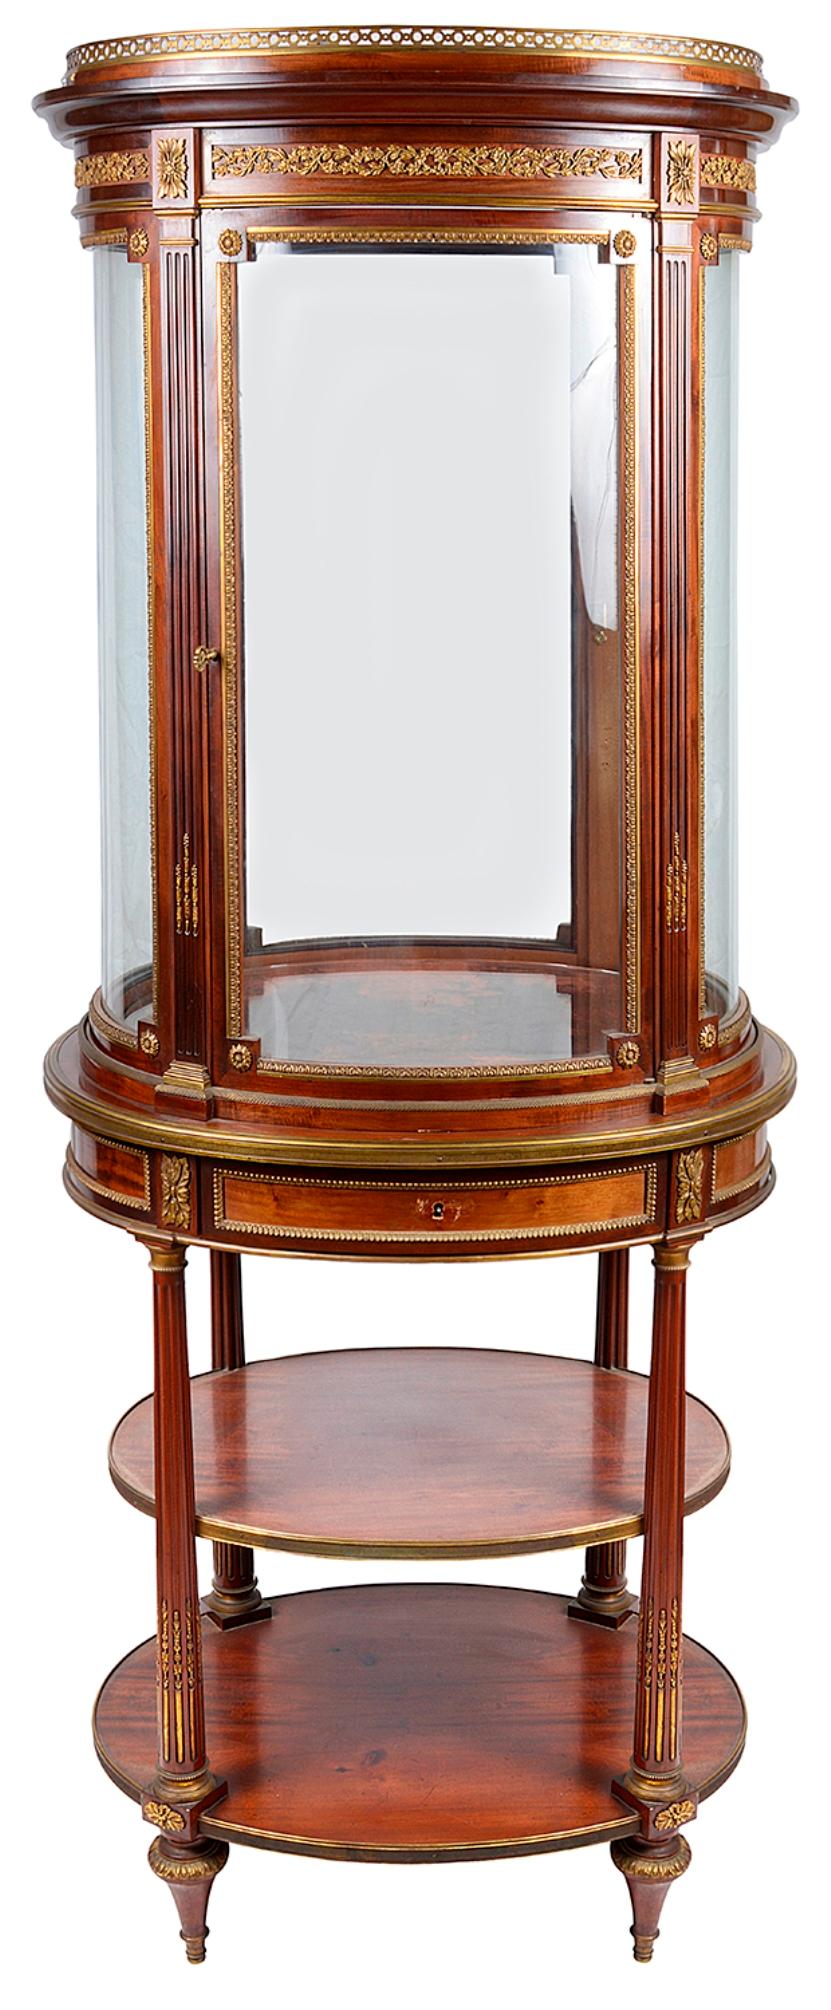 A very good quality late 19th century French mahogany free standing oval vitrine, having a gilded ormolu gallery to the top and foliate mounts to the pelmet. Bowed glass panels to all sides, a single door opening to reveal glass shelves within. A